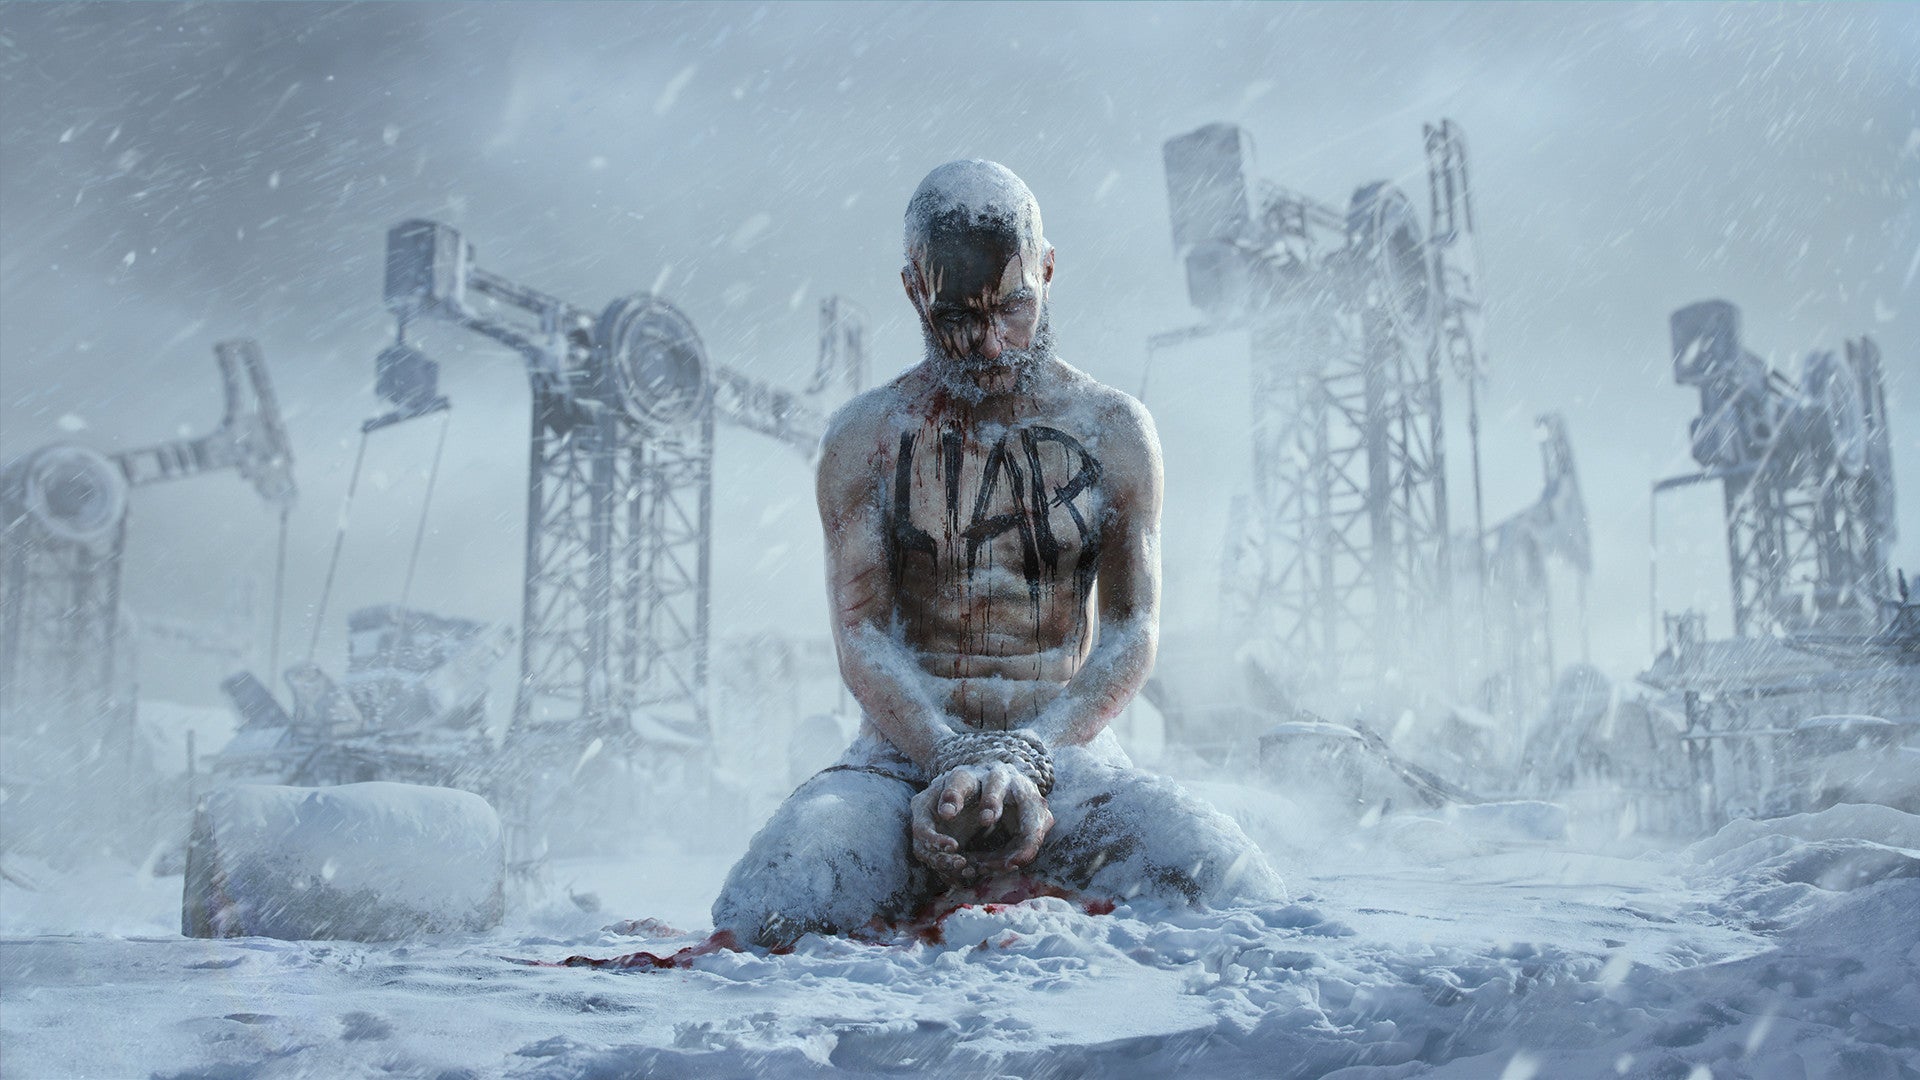 An image from Frostpunk 2's announcement showing a man, on his knees in the snow, frozen to death with "LIAR" written on his bare chest.